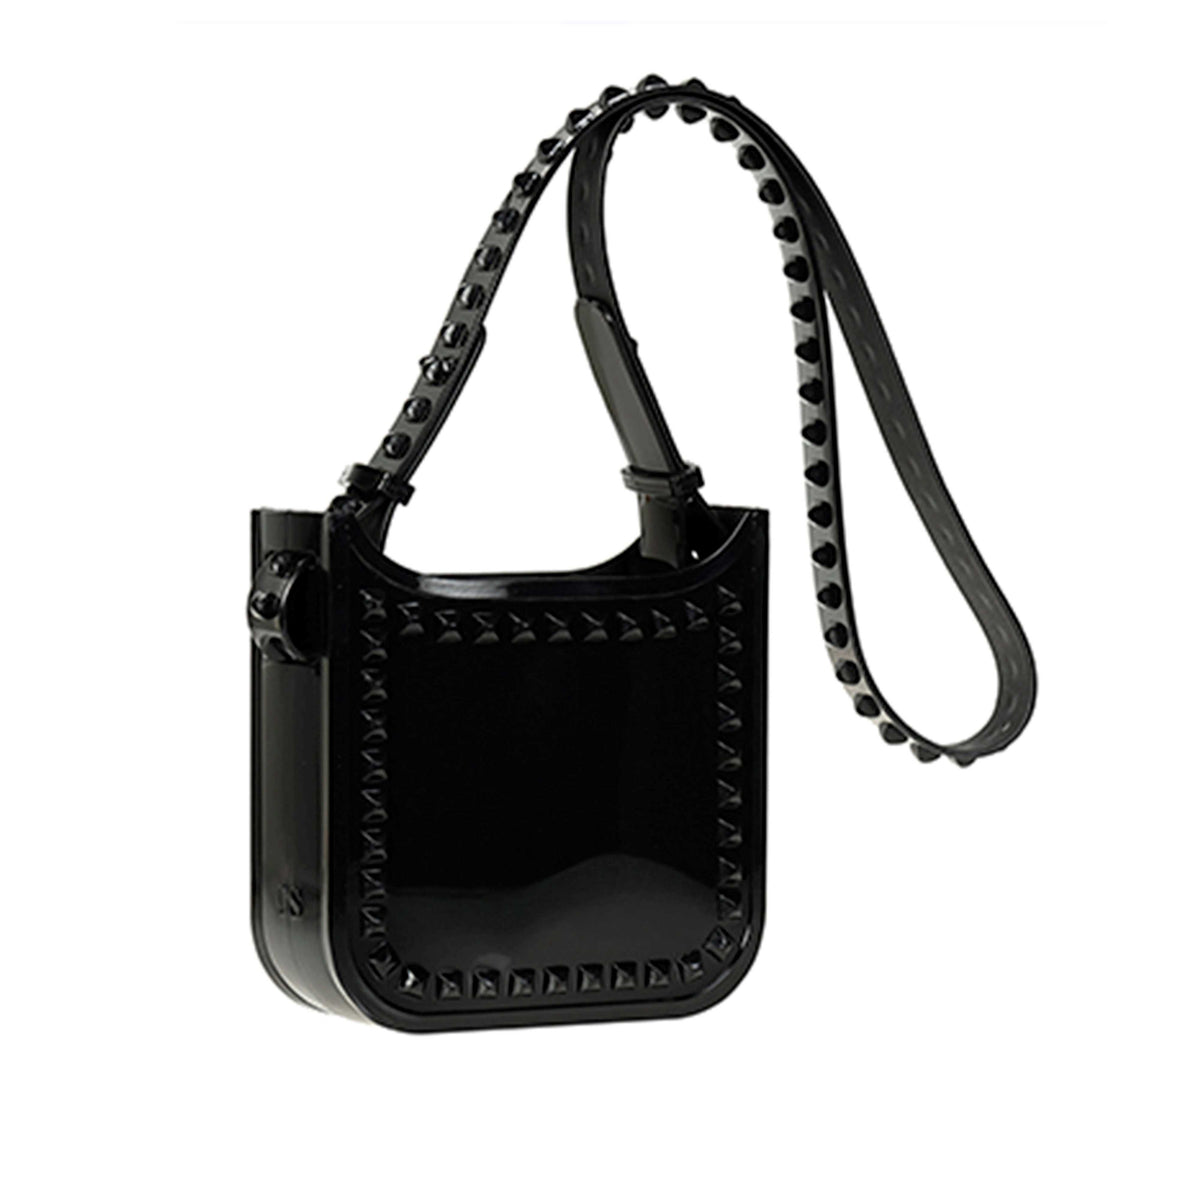 Black Lisa studded small purse crossbody goes well with any outfit